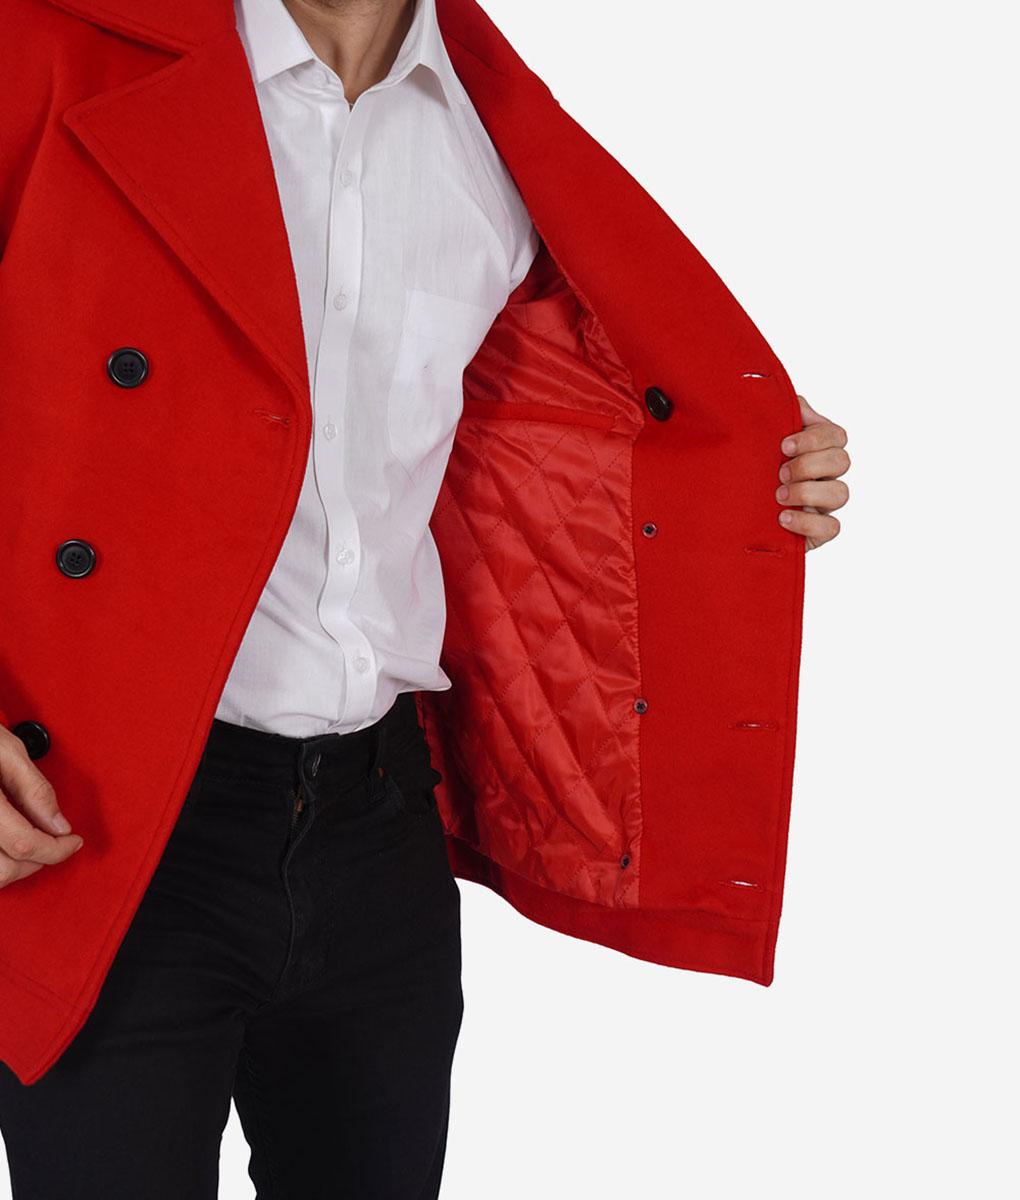 Robert Mens Red Double-Breasted Wool Pea Coat